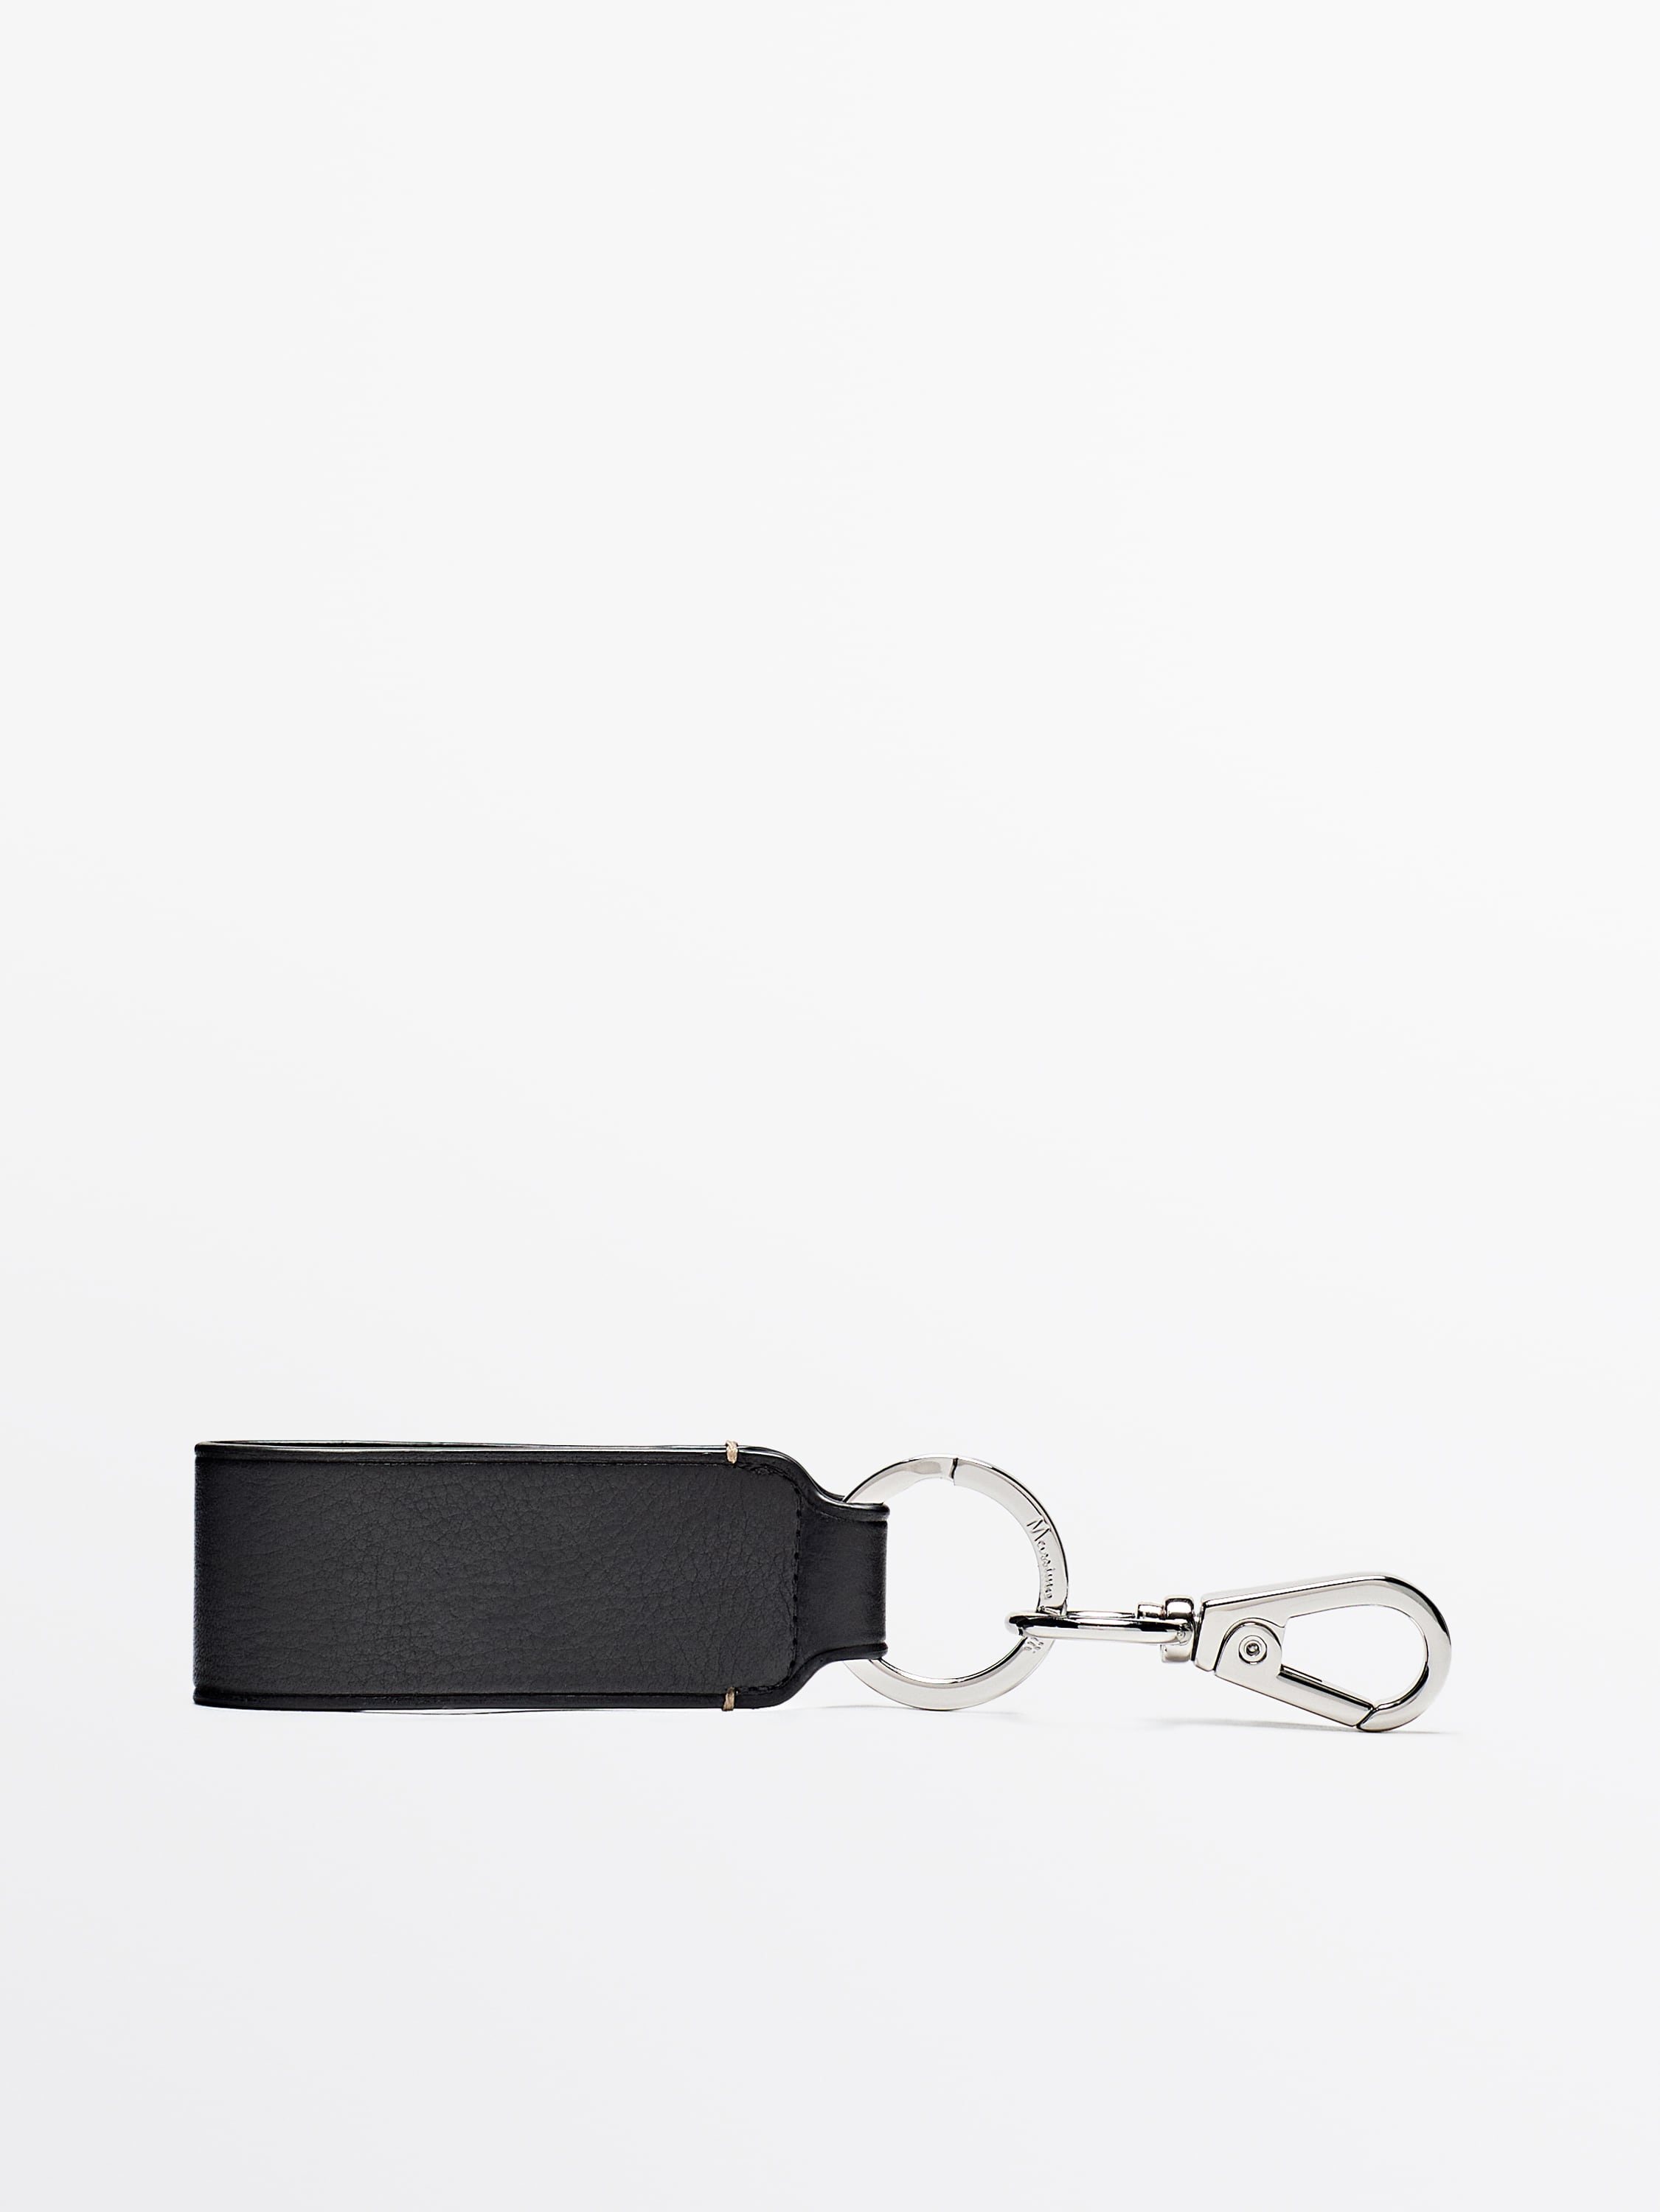 Leather key ring with lobster clasp